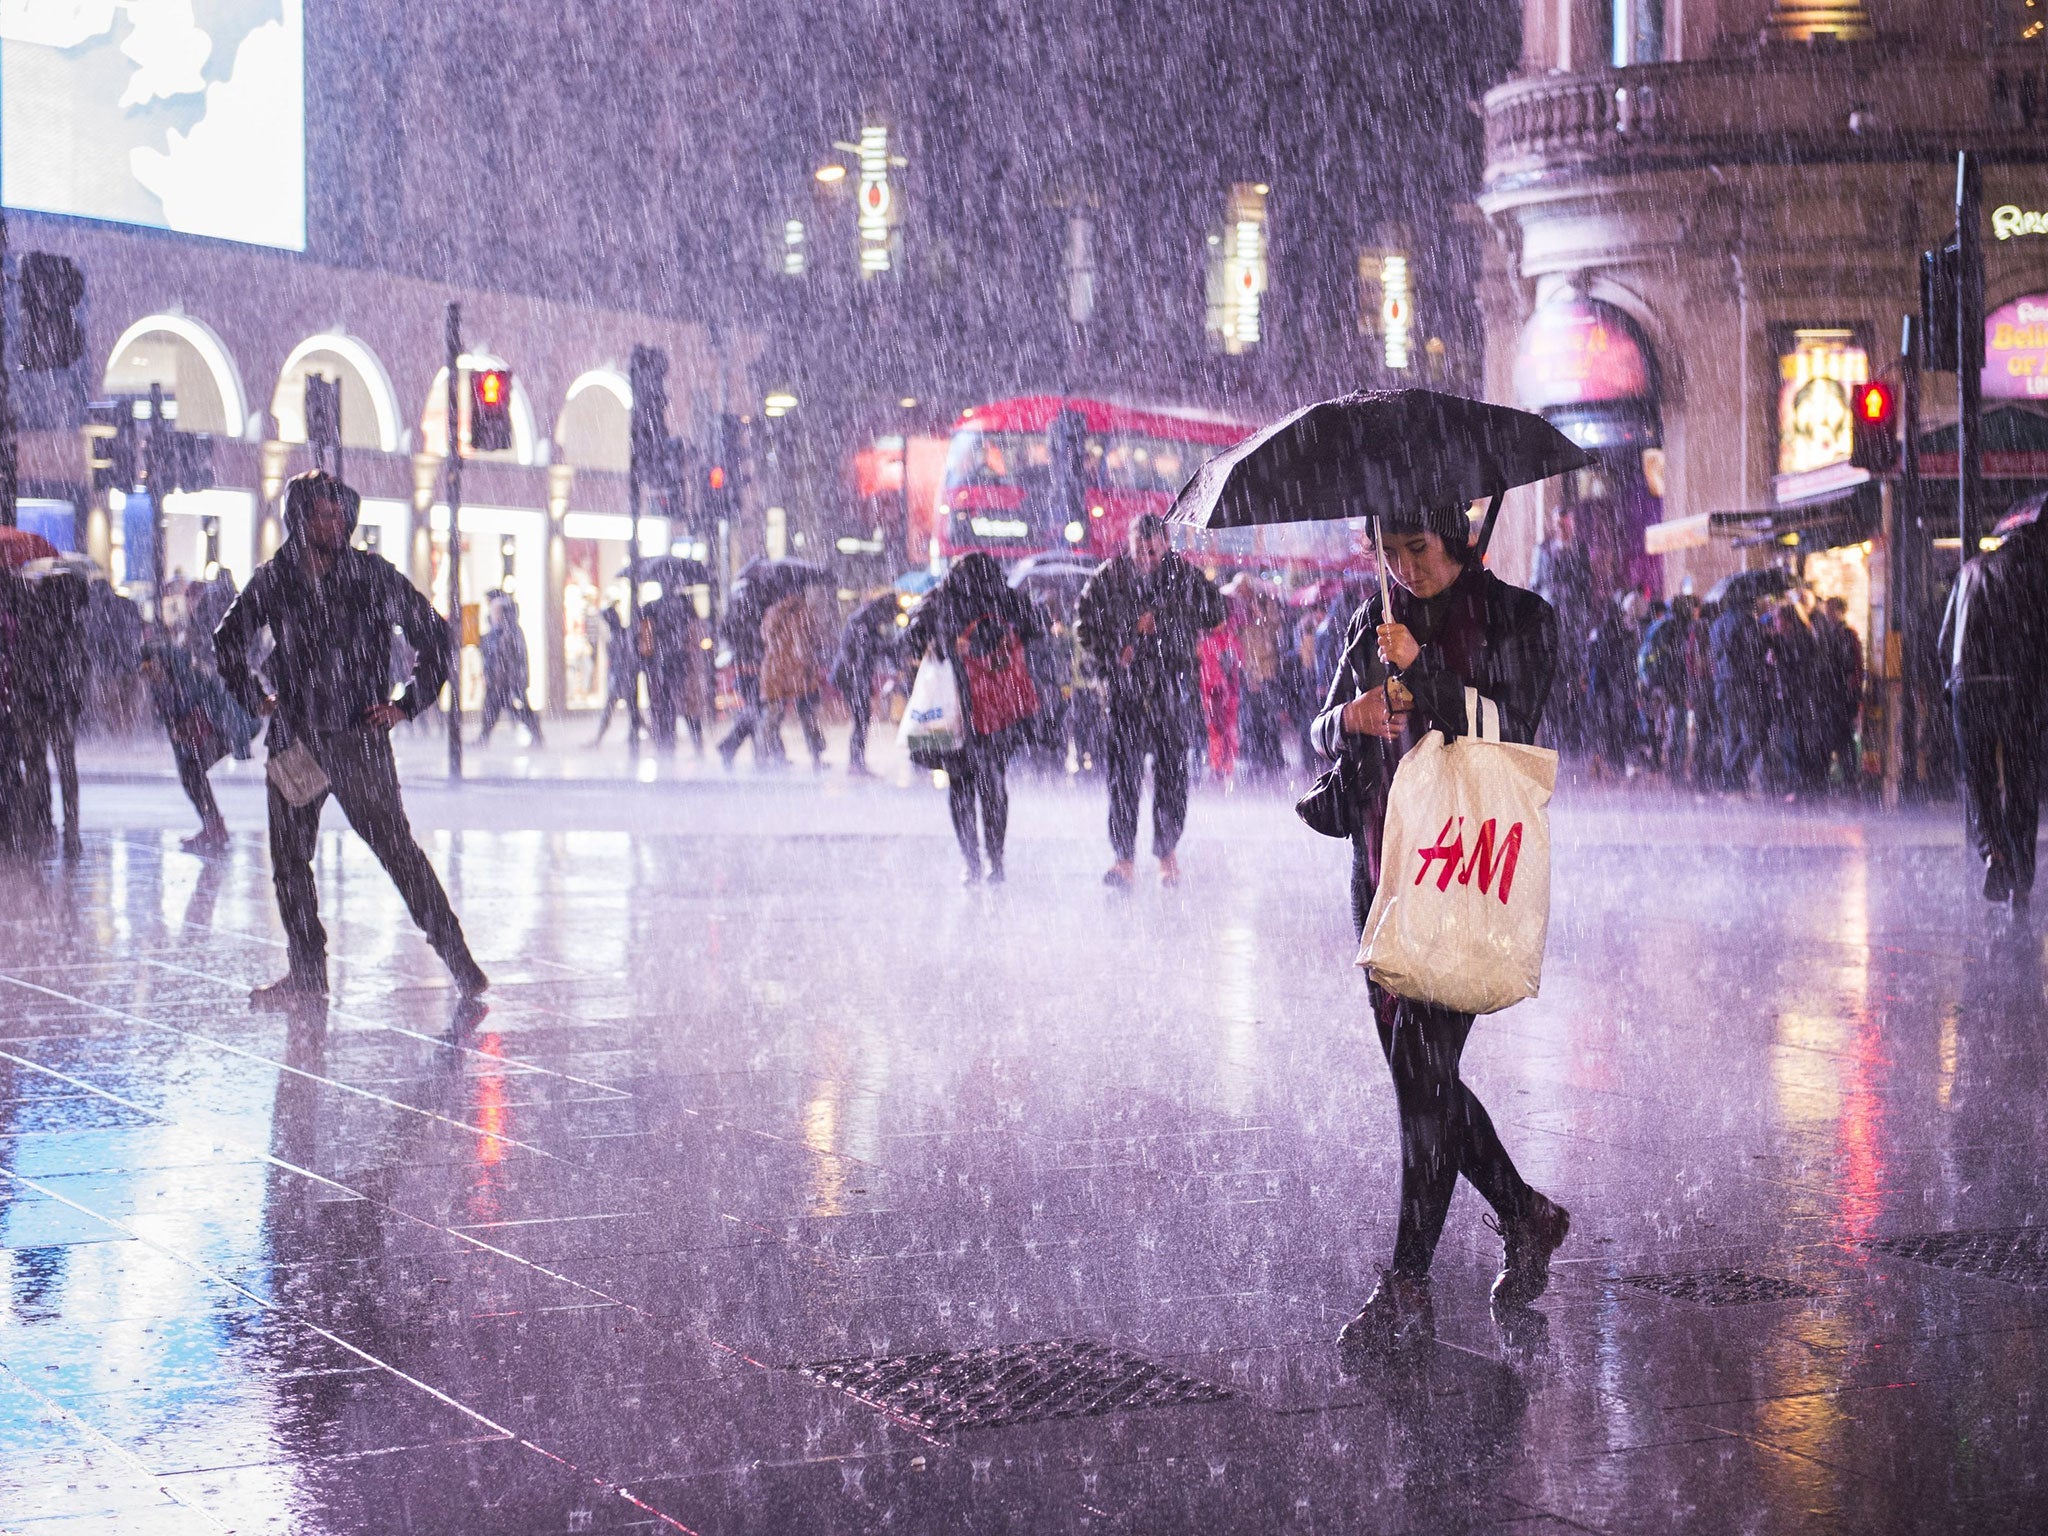 Uk Weather Flood Warnings Issued As Forecasters Predict A Month Of Storms Wind And Heavy Rain